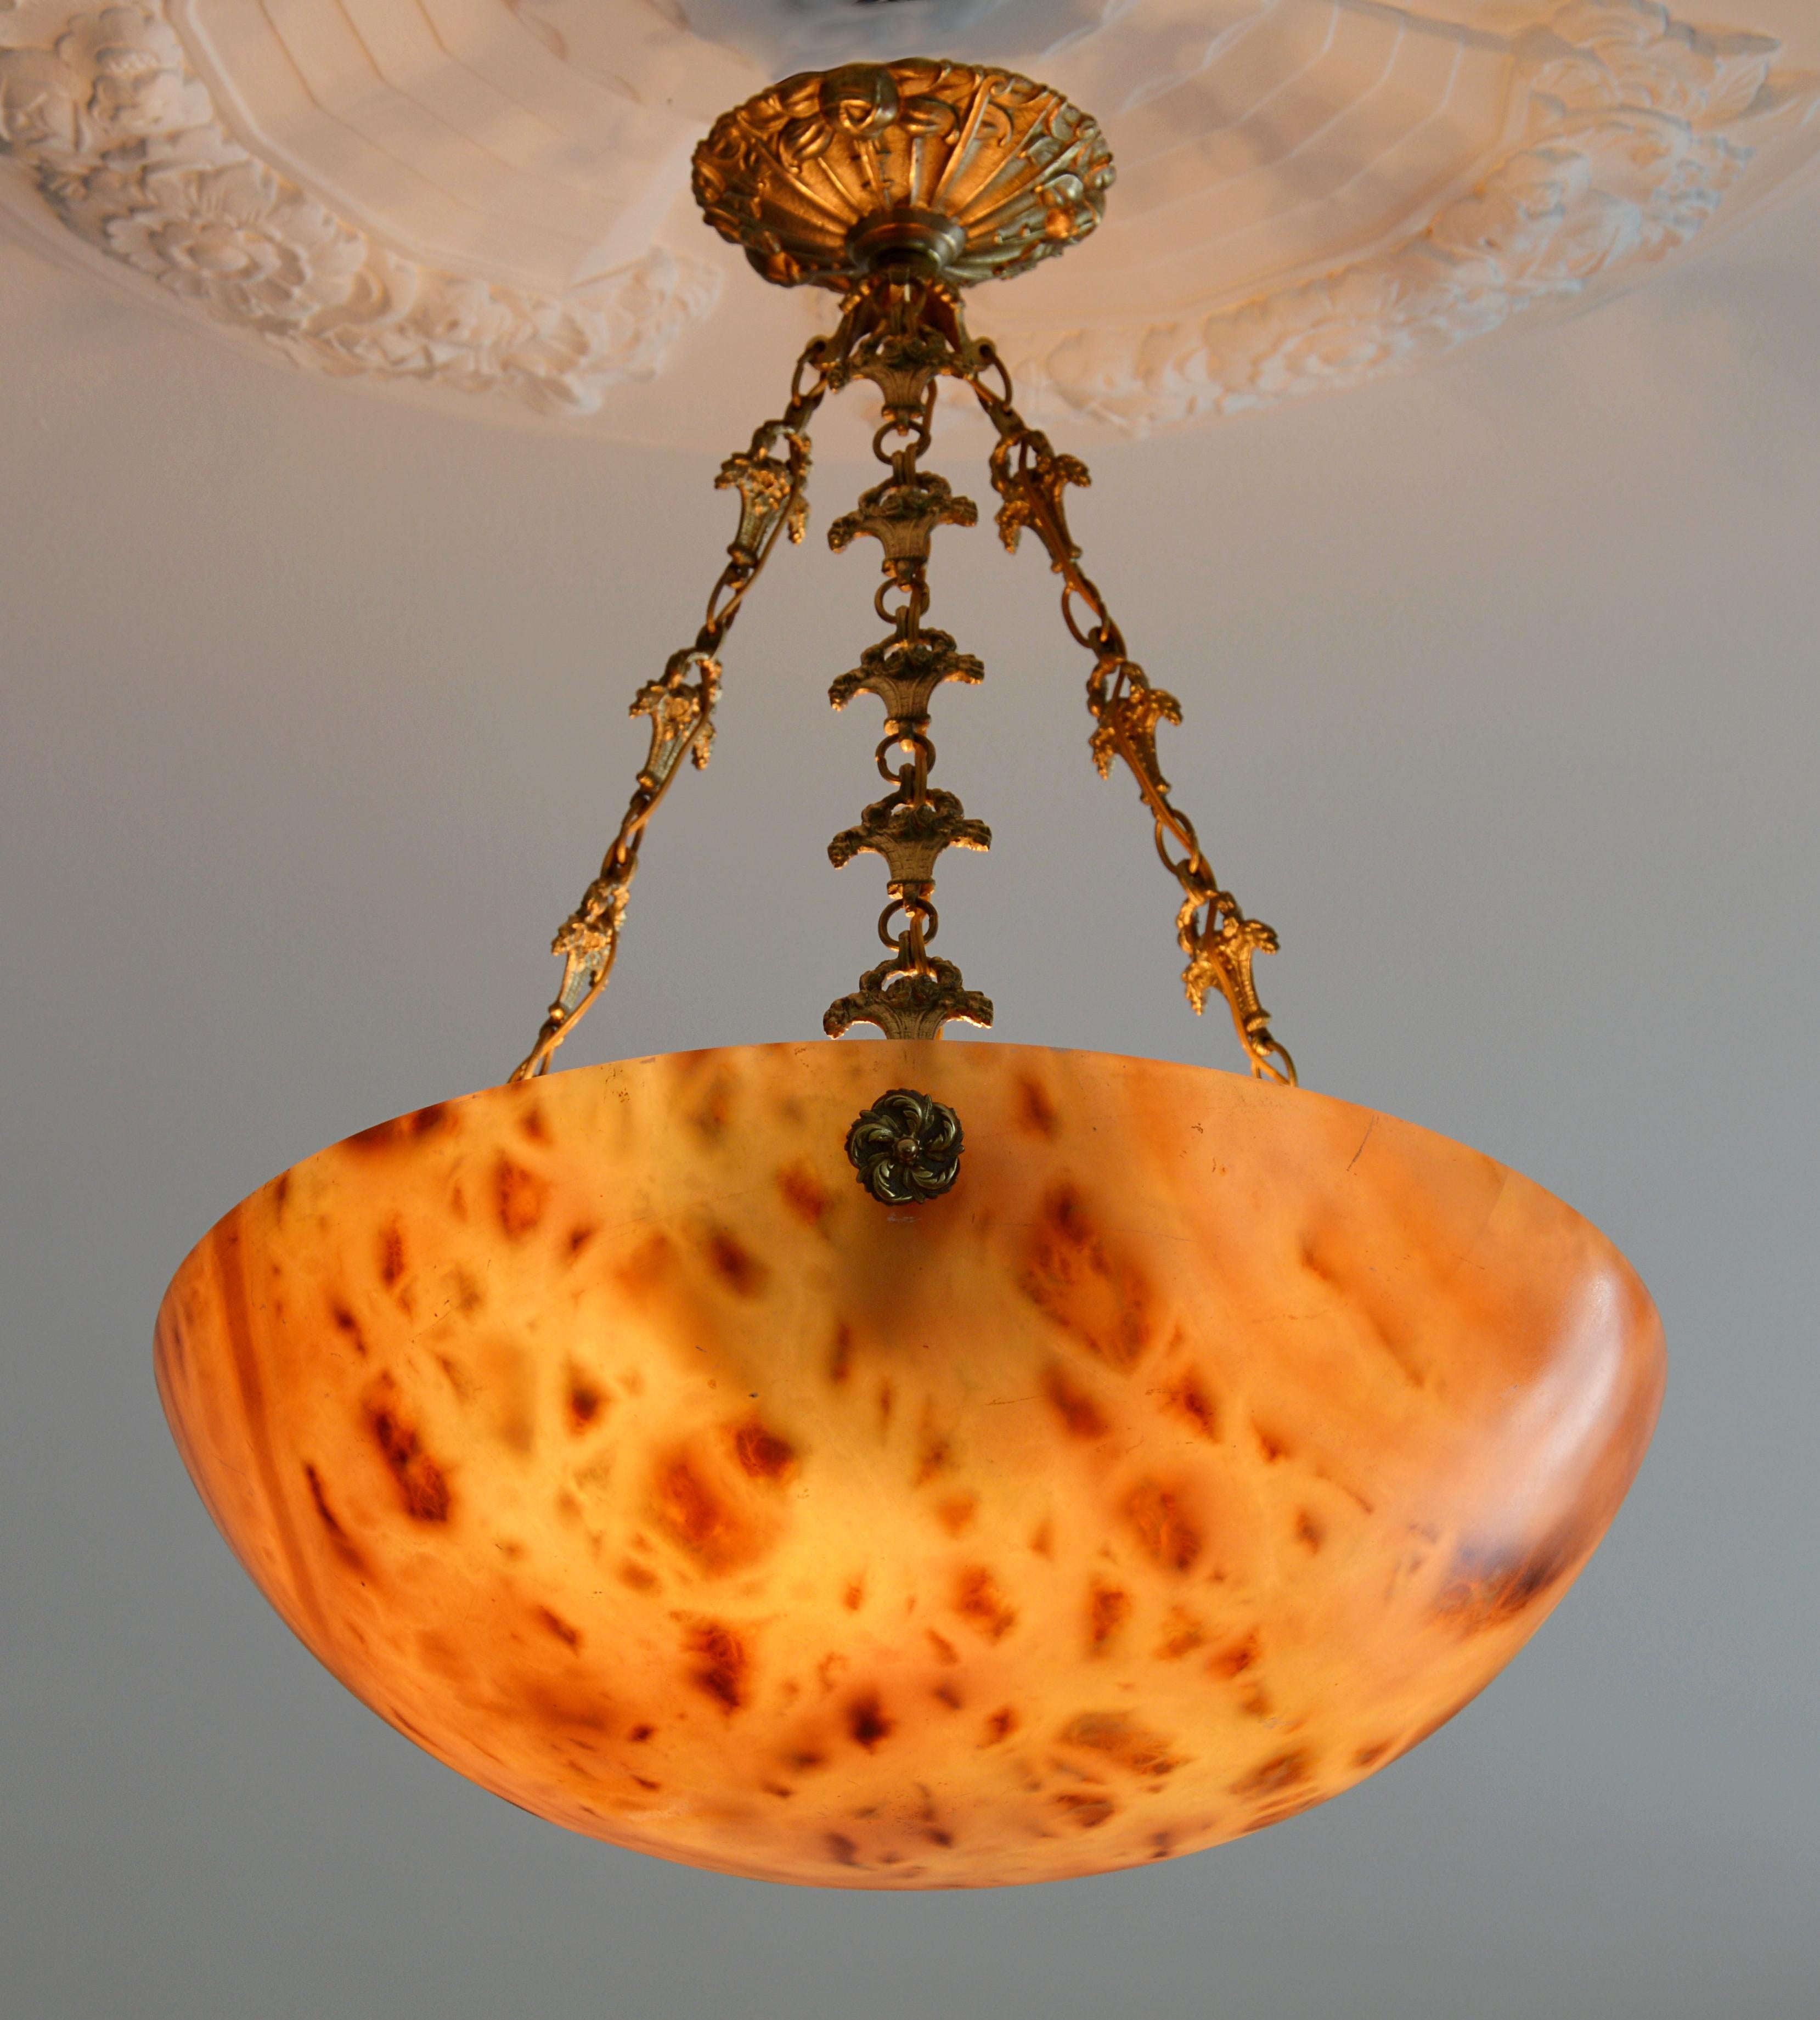 Large French Art Deco chandelier, France, early 1920s. Alabaster and bronze. Large thick alabaster shade hung on its original fixture. Old alabaster cannot be compared to new ones. Old alabaster has veins. Sometimes they can be mistaken for cracks.